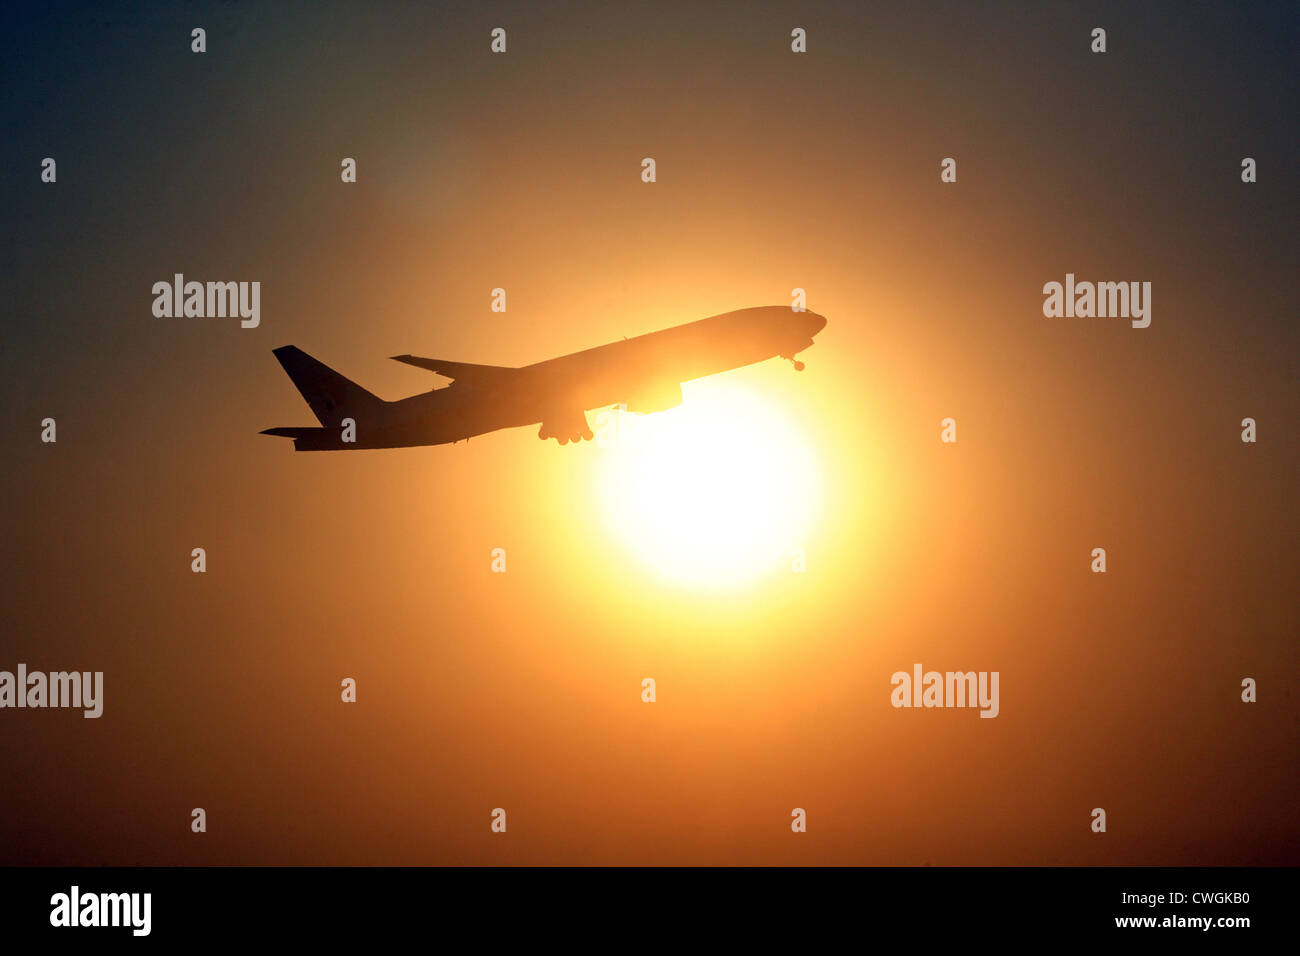 Shanghai, symbol Photo airliner shortly after takeoff from the sun Stock Photo